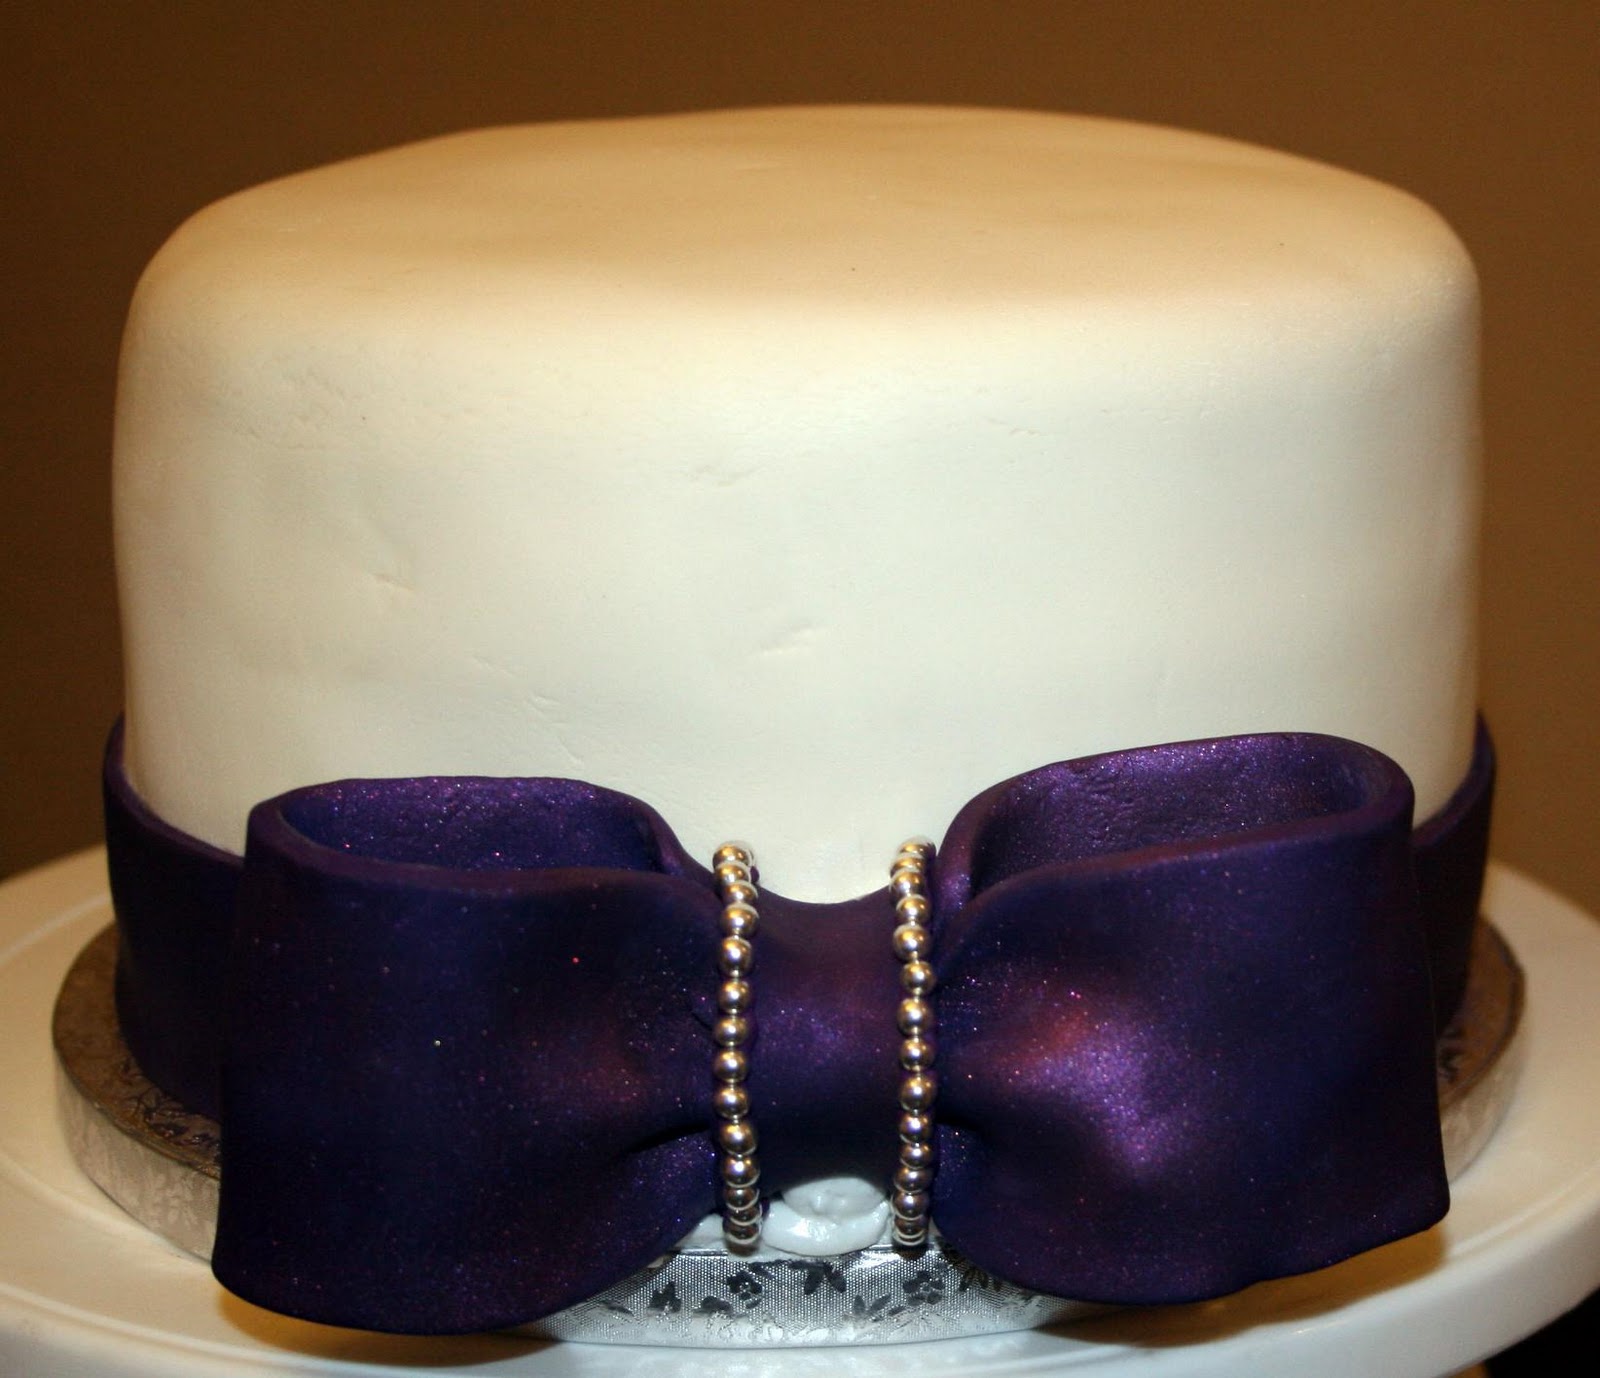 This cake was for a bridal